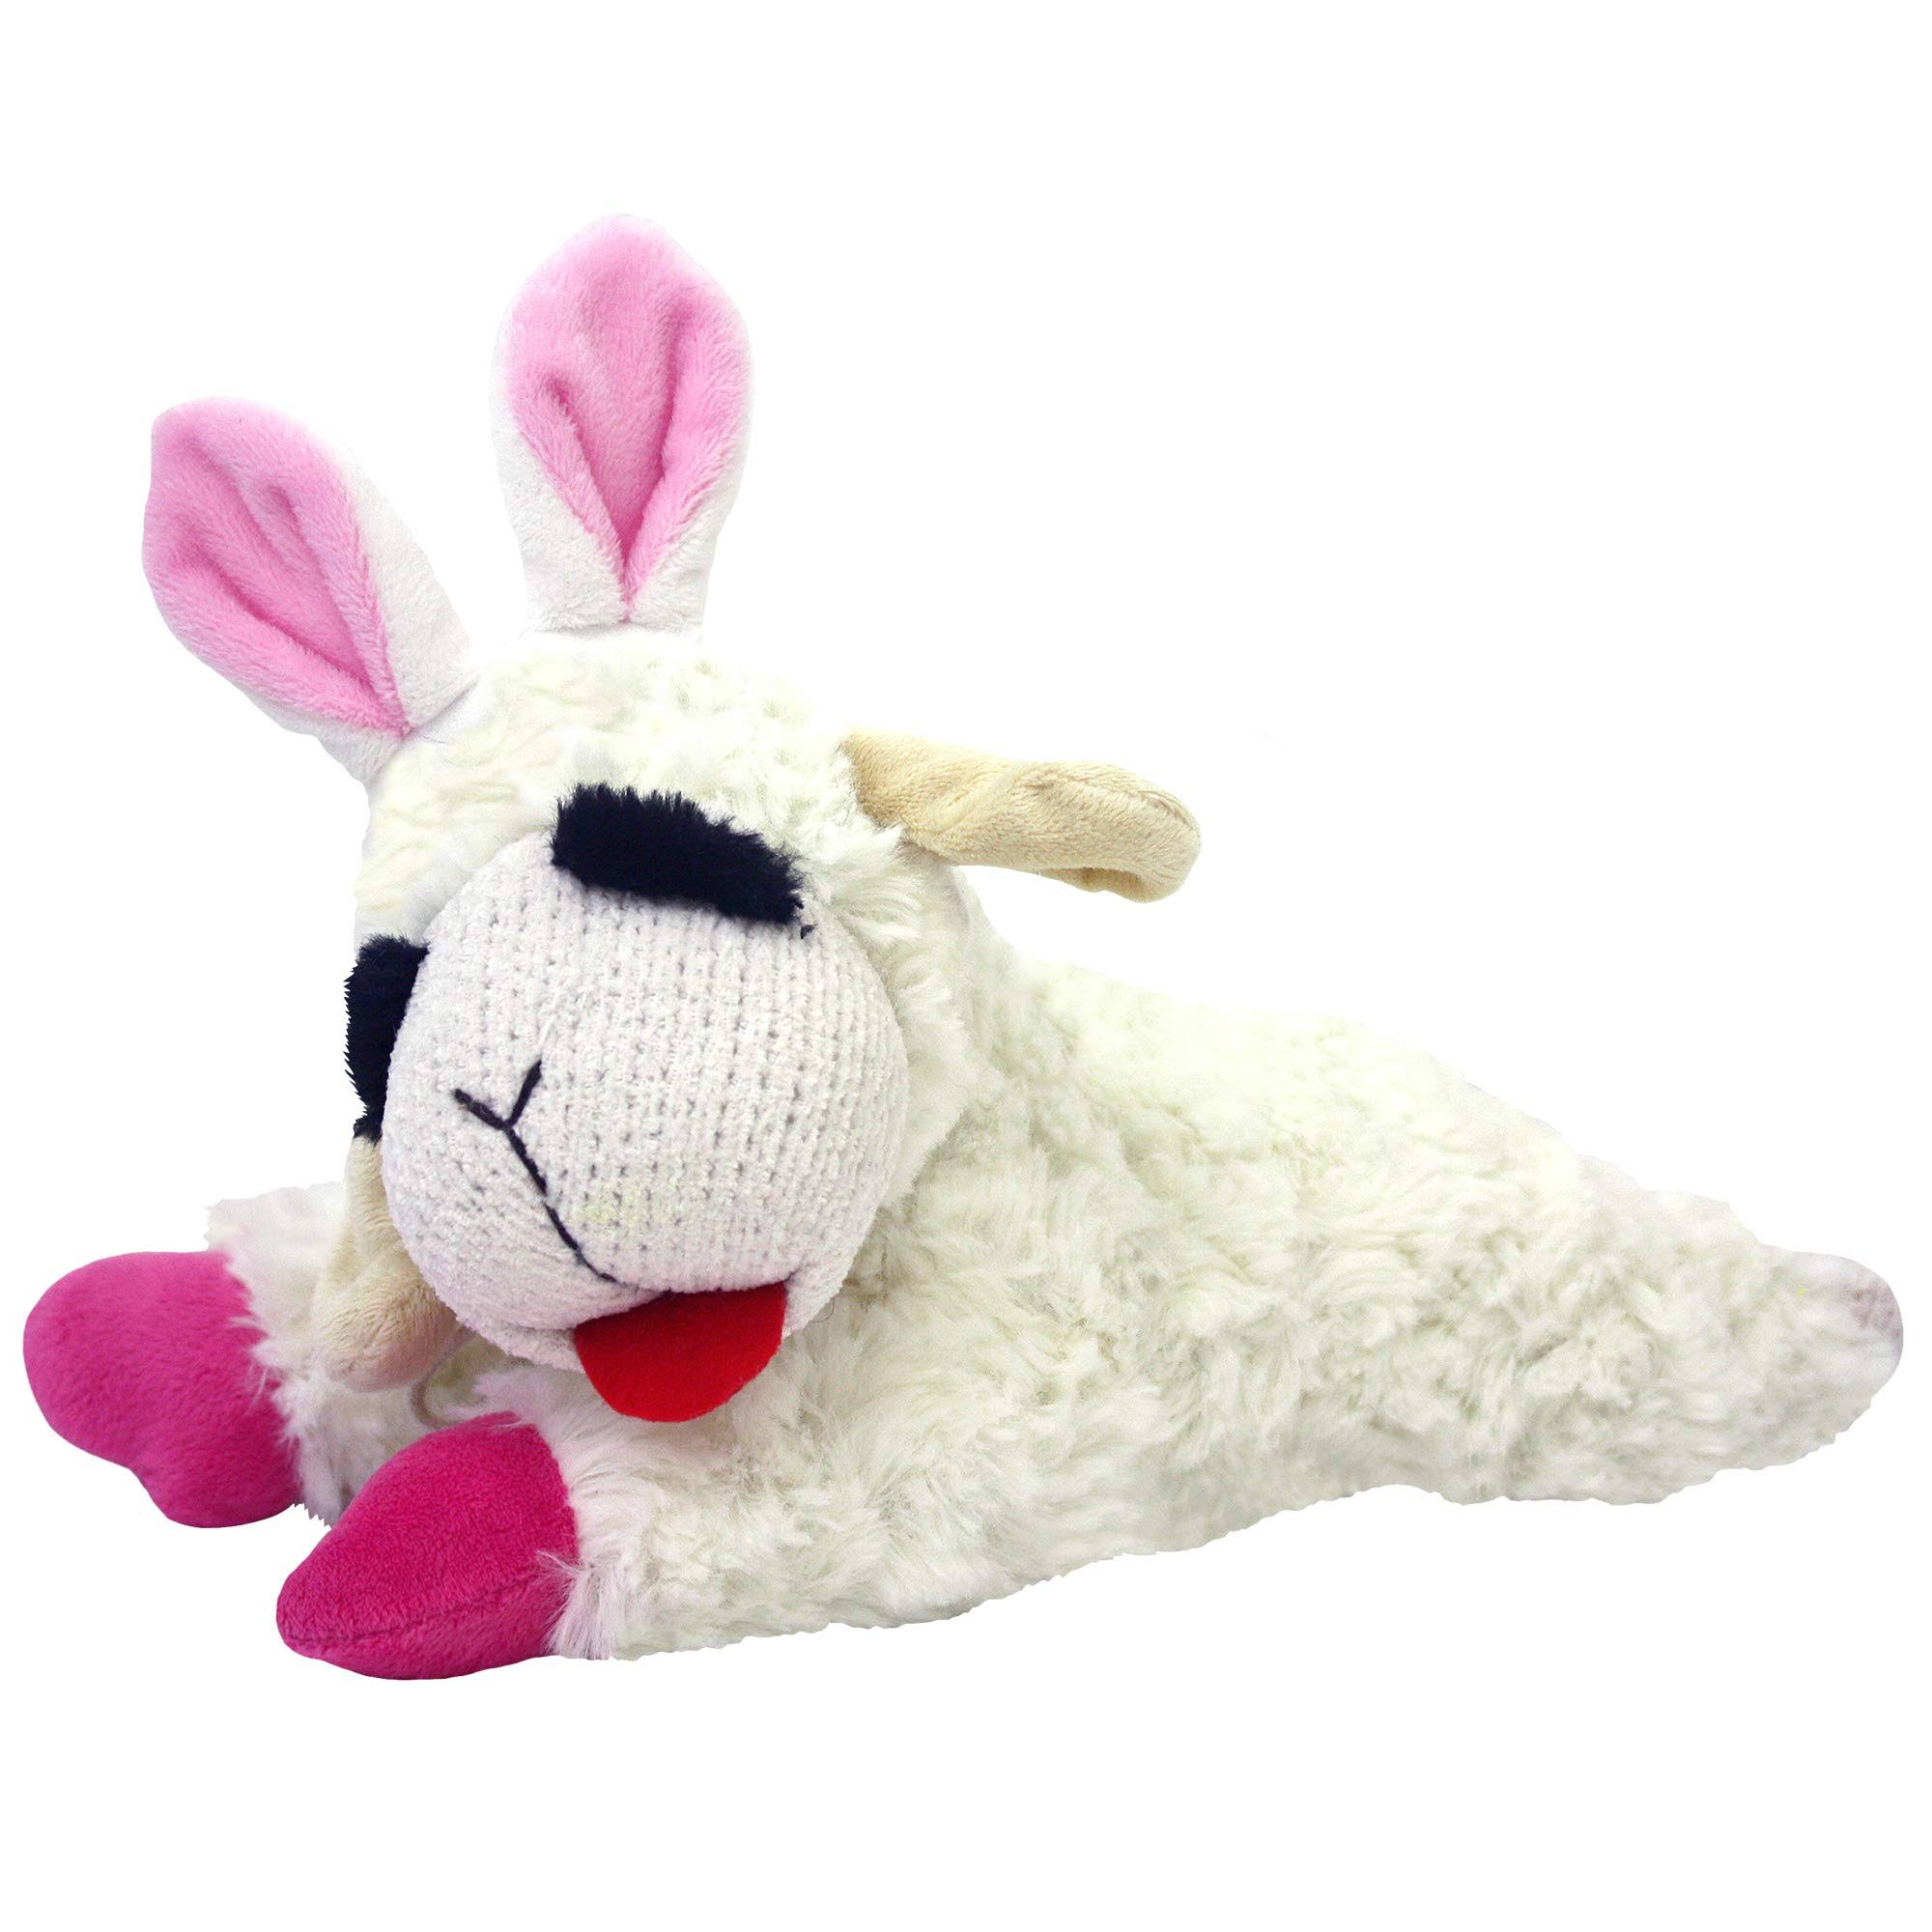 Easter Lamb Chop Toy - 10 inch